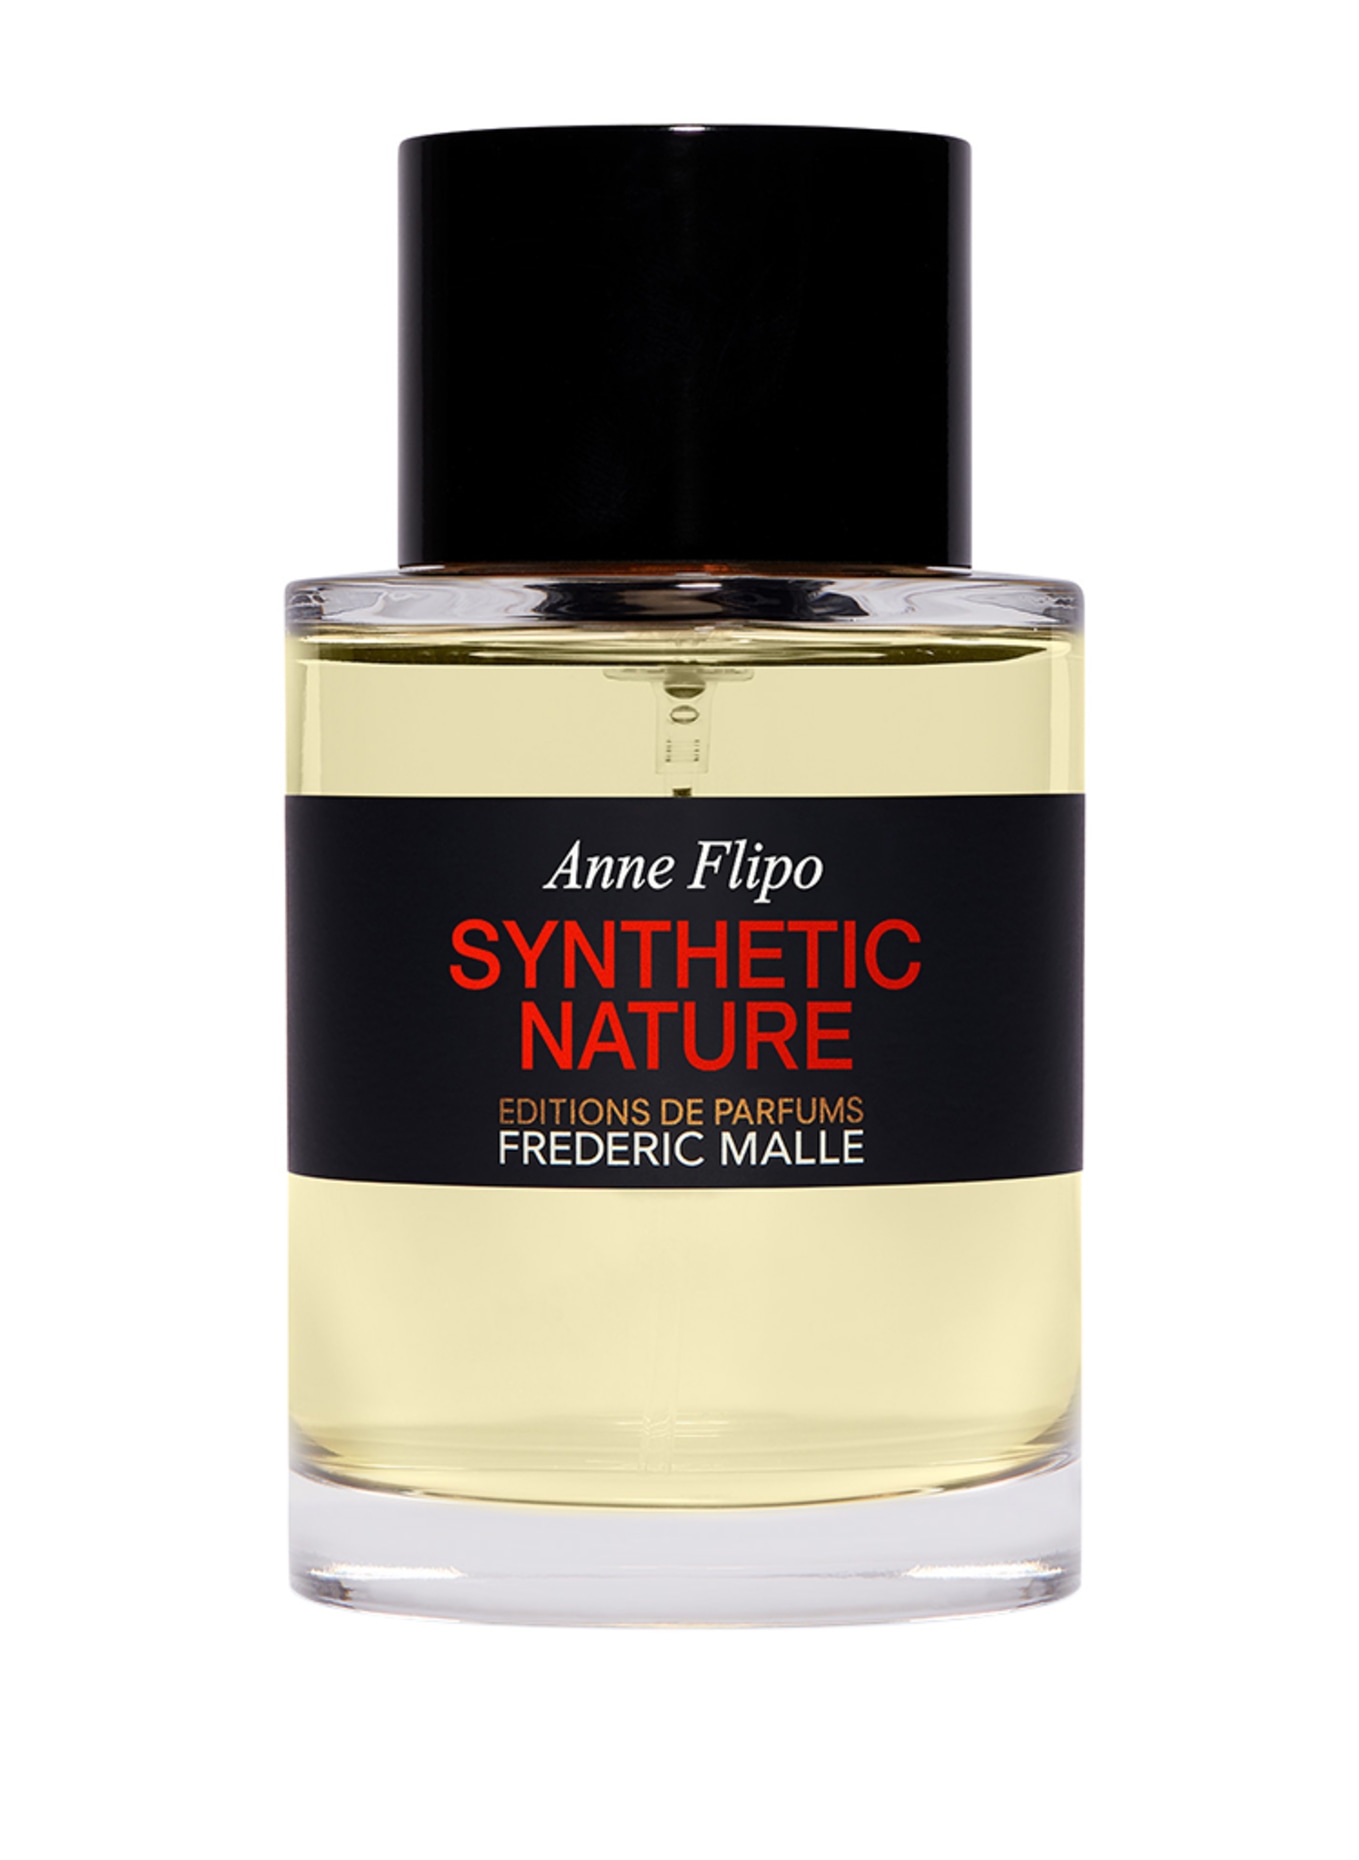 EDITIONS DE PARFUMS FREDERIC MALLE SYNTHETIC NATURE COLOGNE (Obrazek 1)